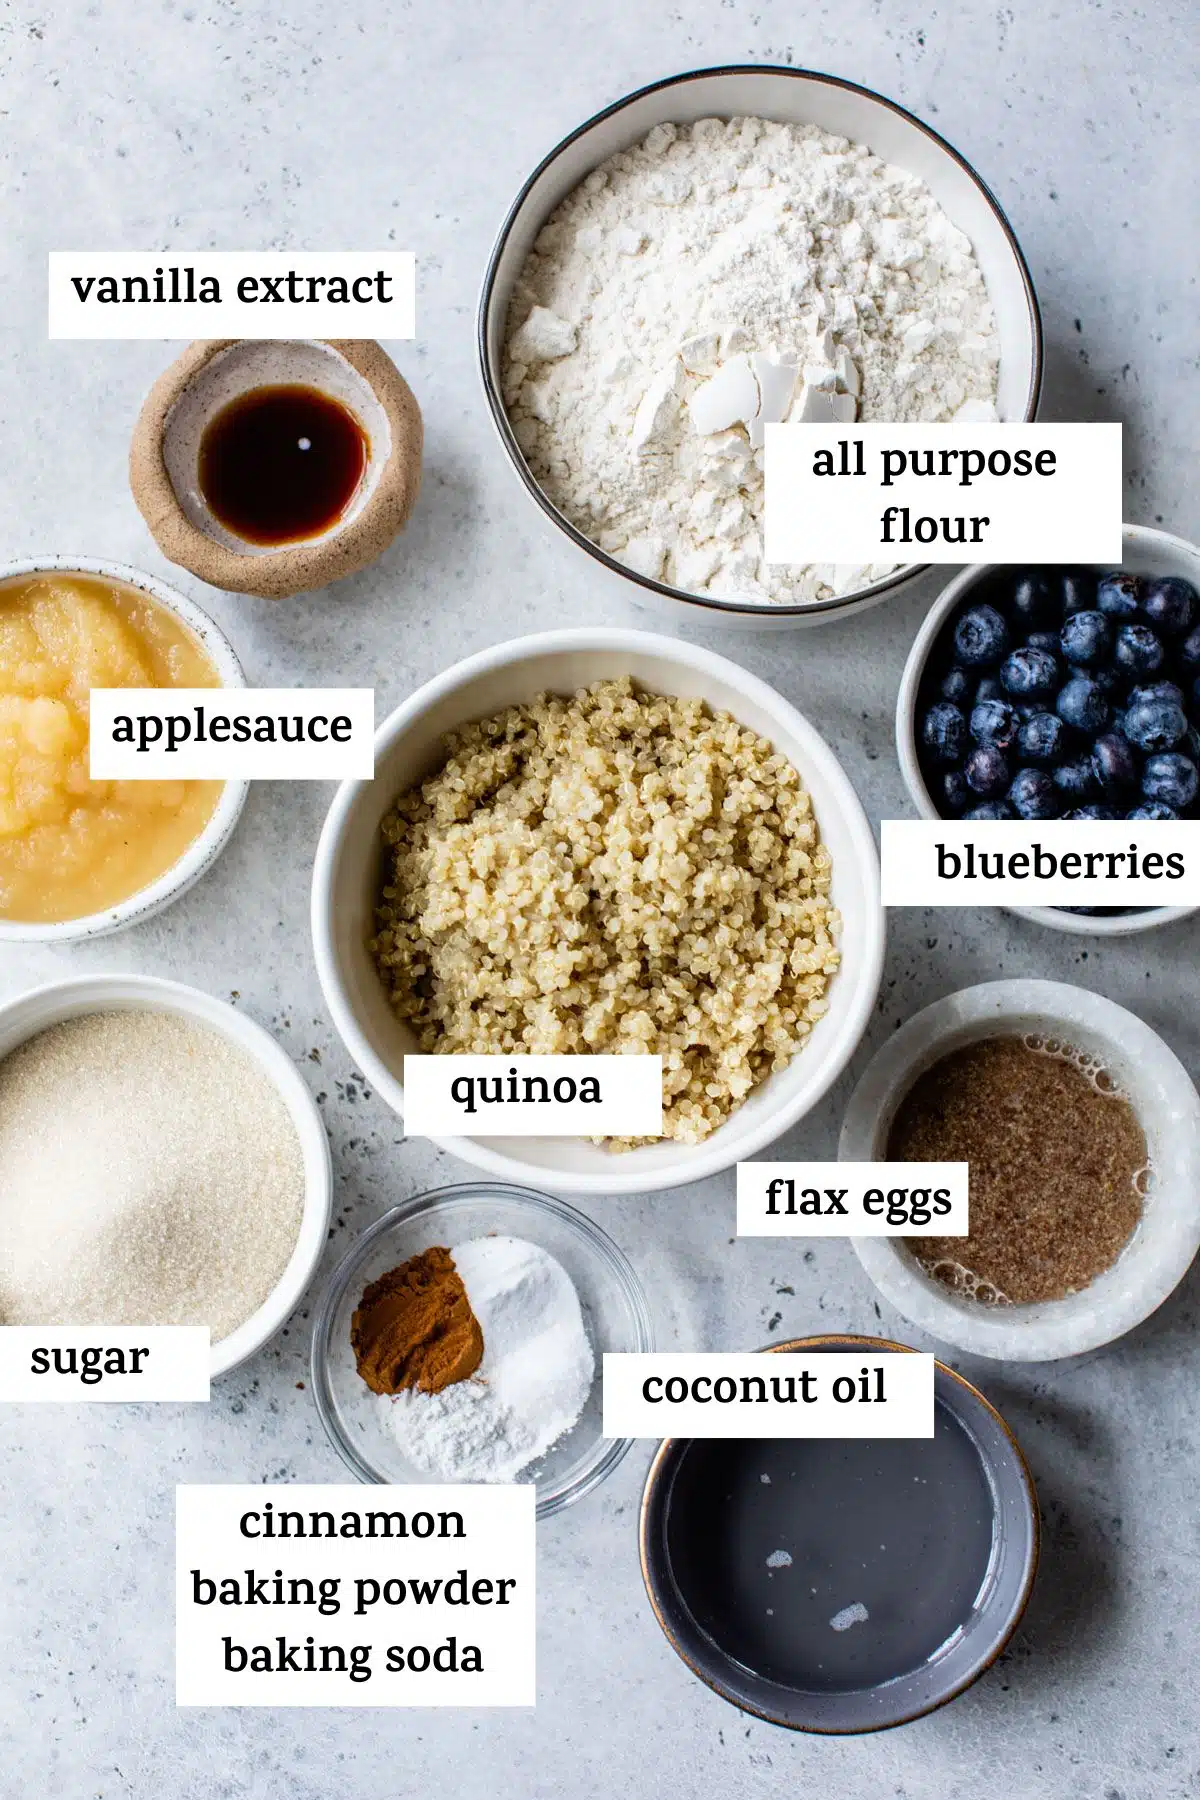 ingredients to make muffins like flour, sugar and quinoa